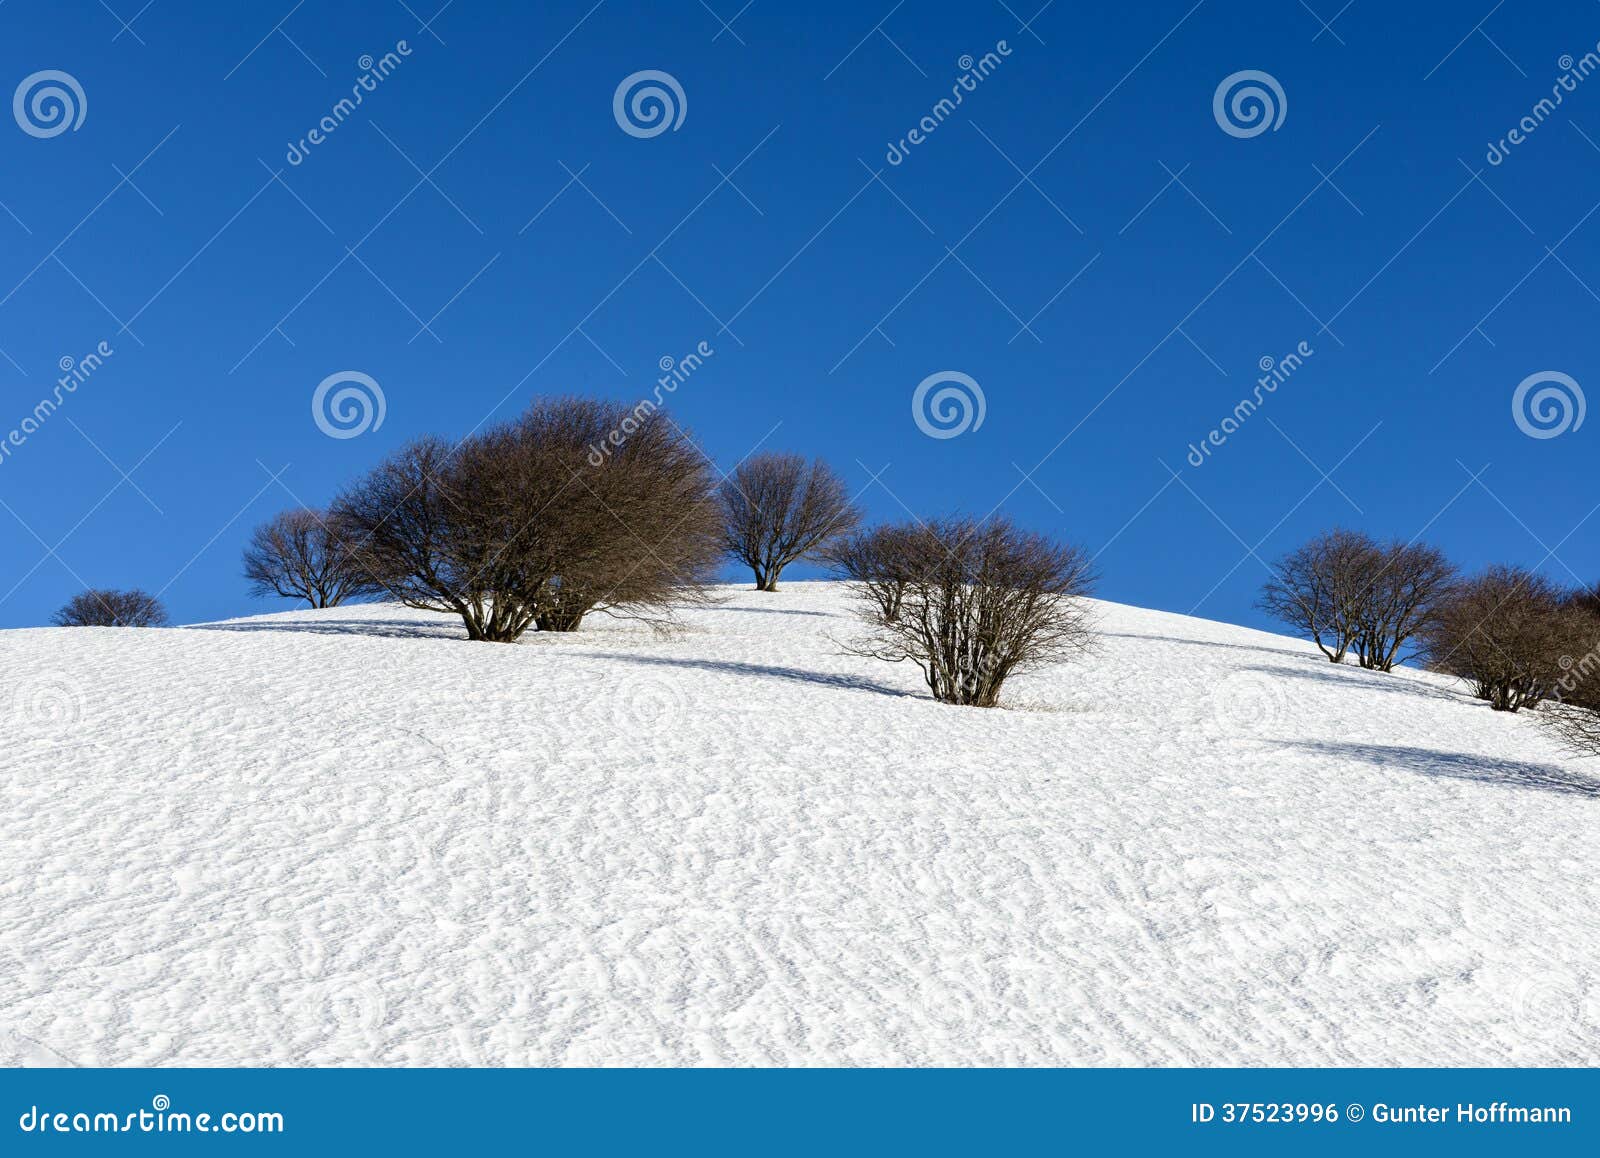 beeches on mount san primo (north italy)